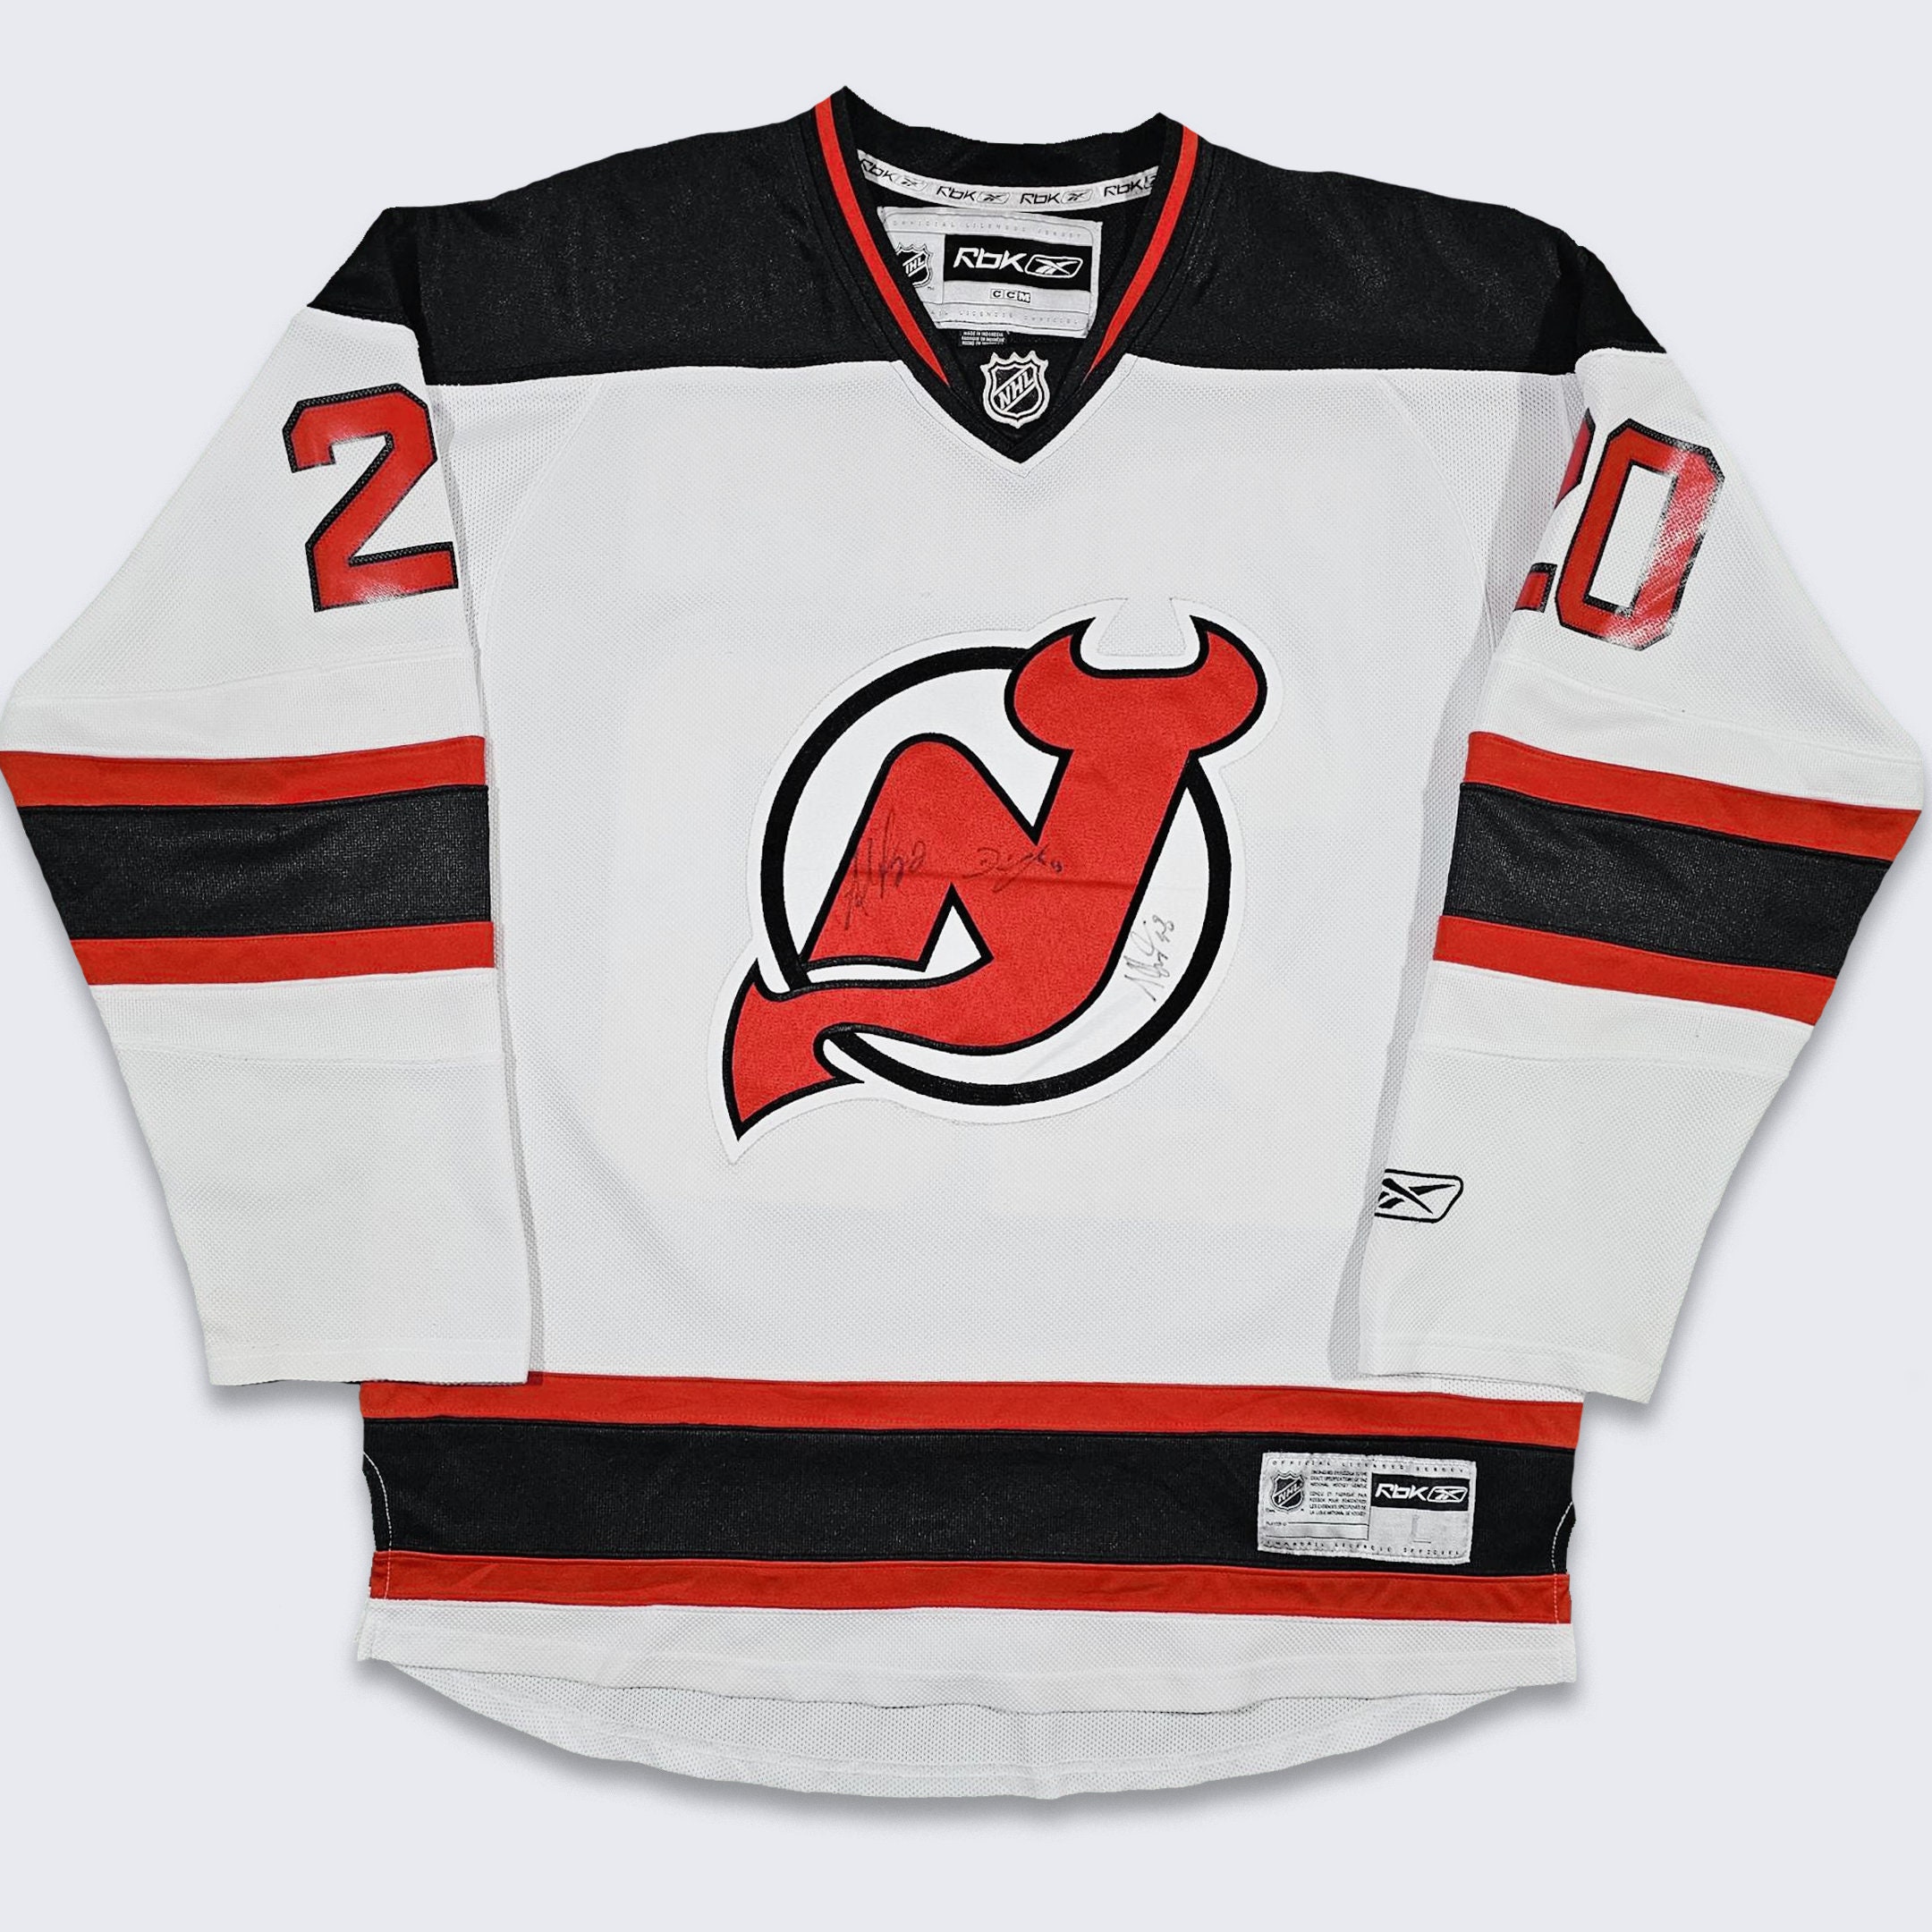 New Jersey Devils Patch Logo, Embroidered Hockey Patches Iron On